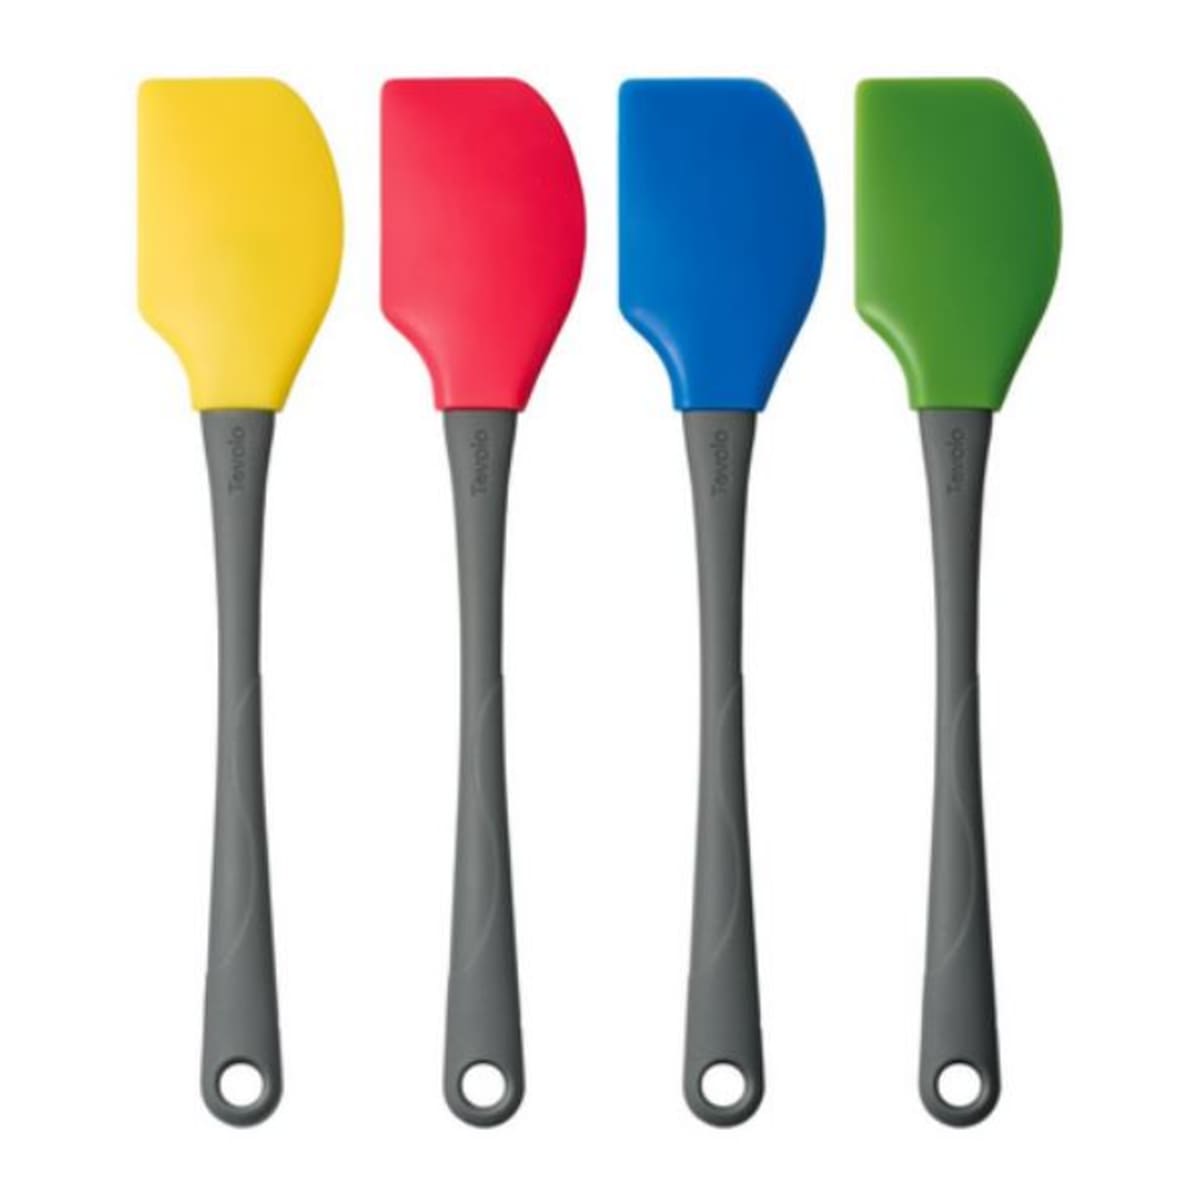 https://images.saymedia-content.com/.image/ar_1:1%2Cc_fill%2Ccs_srgb%2Cfl_progressive%2Cq_auto:eco%2Cw_1200/MTc2NDYzODcyNDMyMTUzODEz/best-all-purpose-silicone-spatula-for-baking-high-heat-review-tovolo.jpg